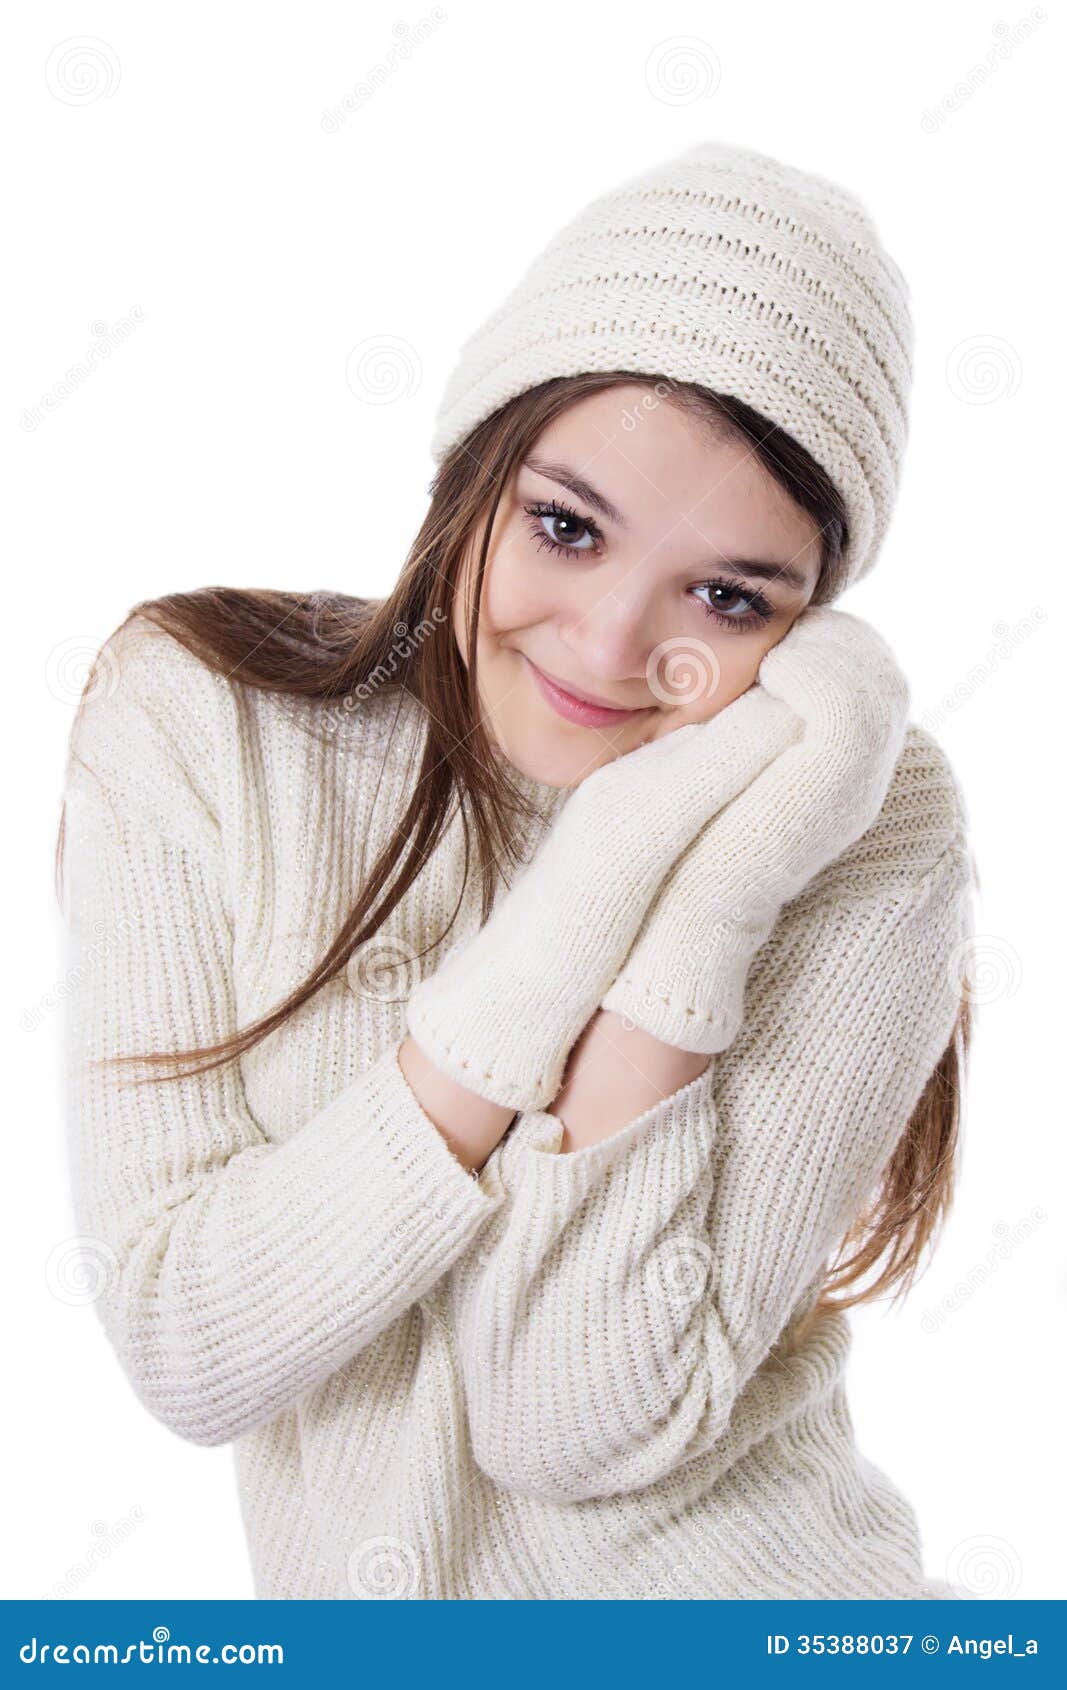 Pretty Teenage Girl in Knitted Mitten and Hat Stock Image - Image of ...